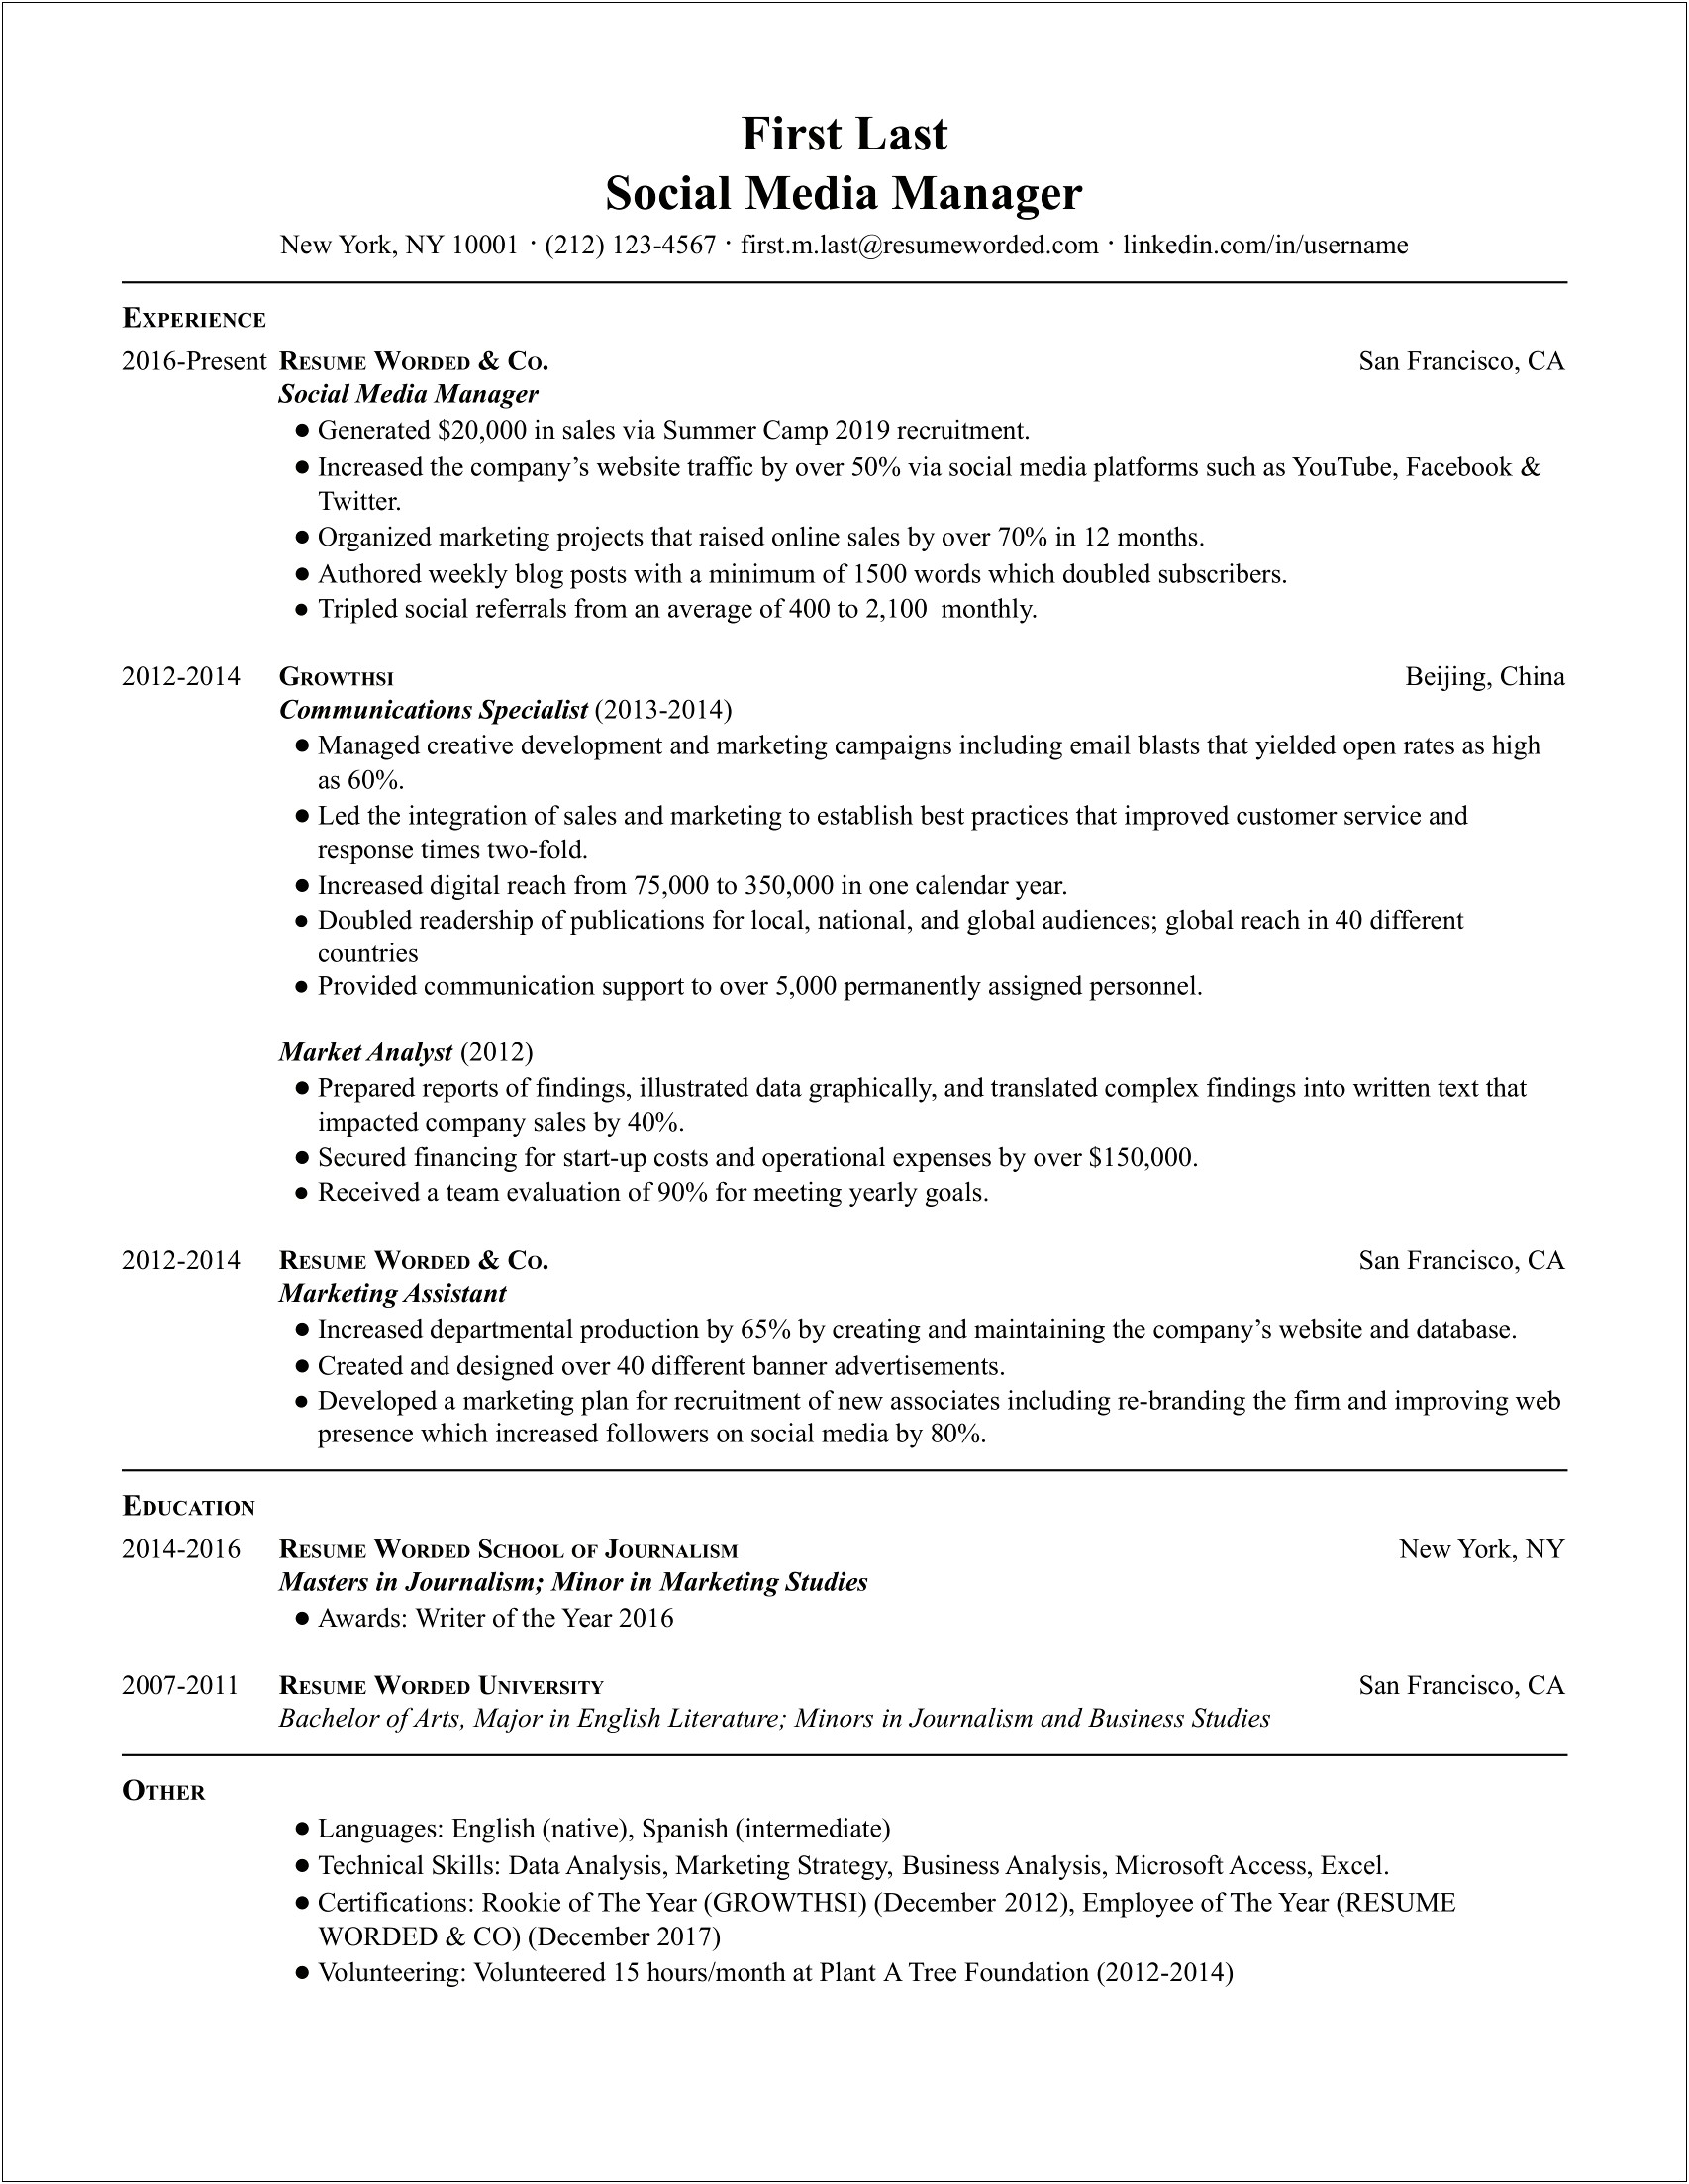 Resume Summary Examples For Advertising